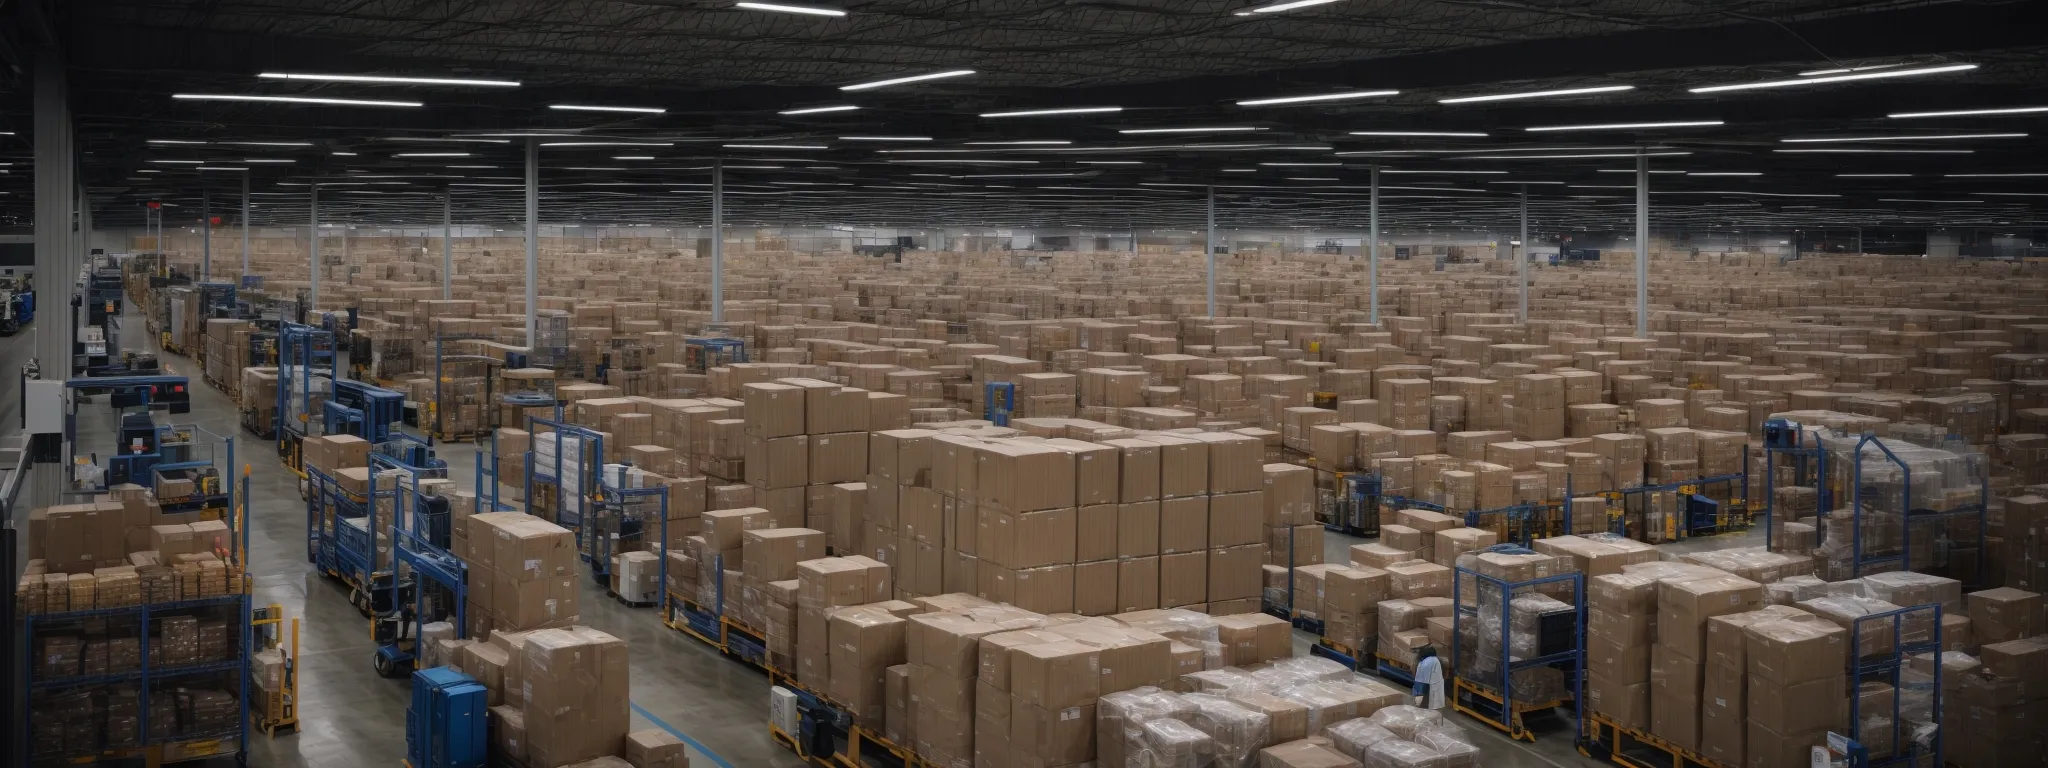 a bustling amazon warehouse with a dense array of products organized for shipping.